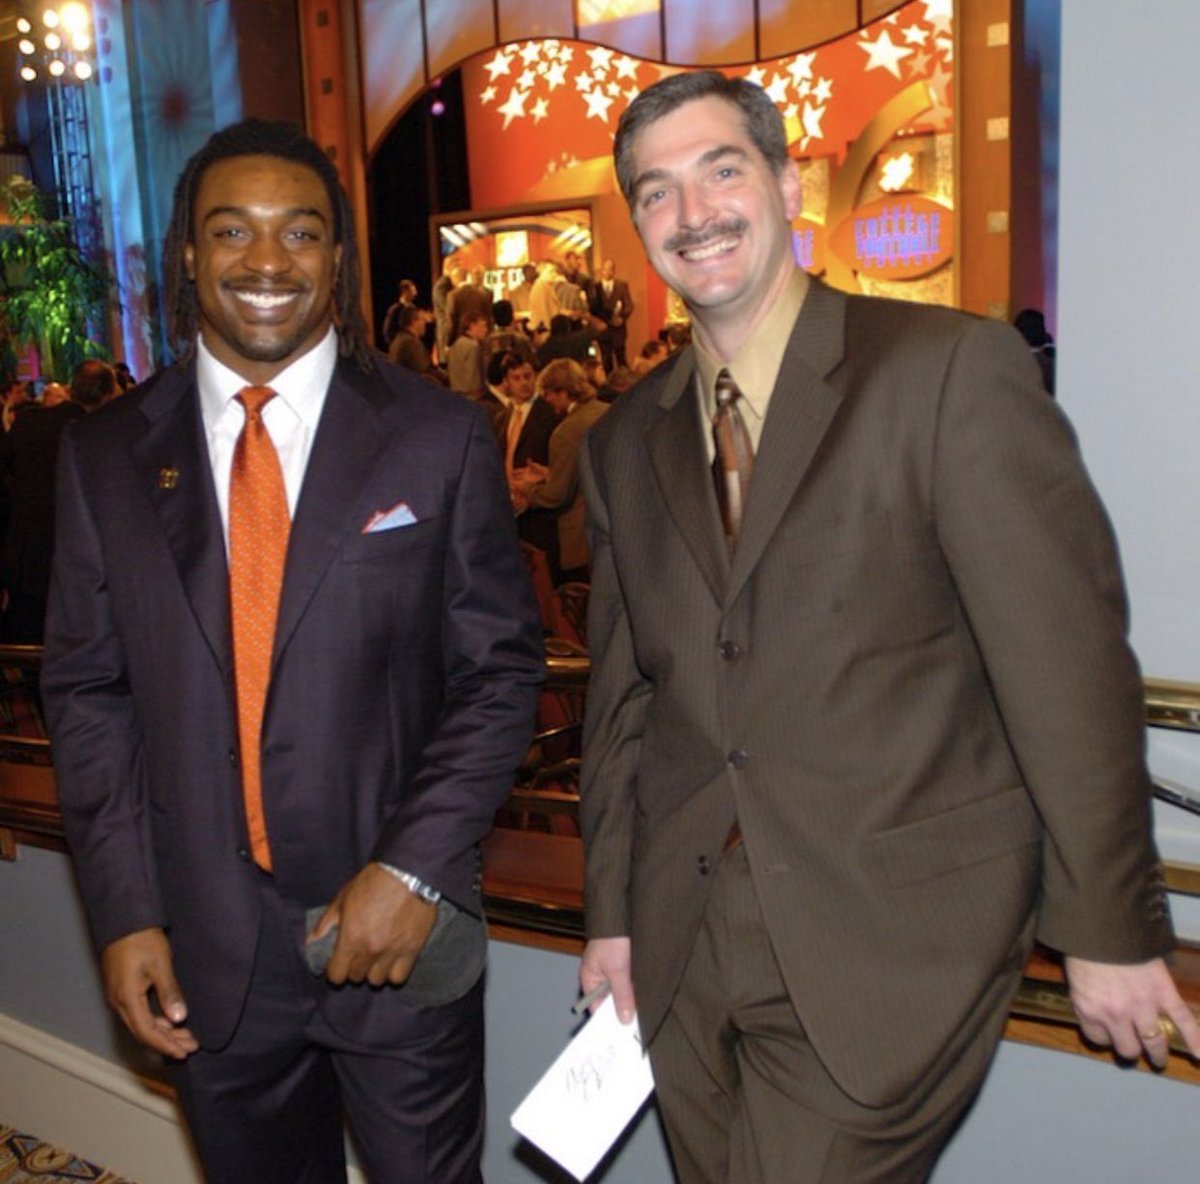 It’s been 4 years since we tragically lost our Longhorn Legend Cedric Benson. I’ve been reflecting on the many talks we had over the years, the wisdom he shared and the wonderful memories he left us all. He was one of a kind and an all-time great. Miss you Ced 🙏🏻🧡